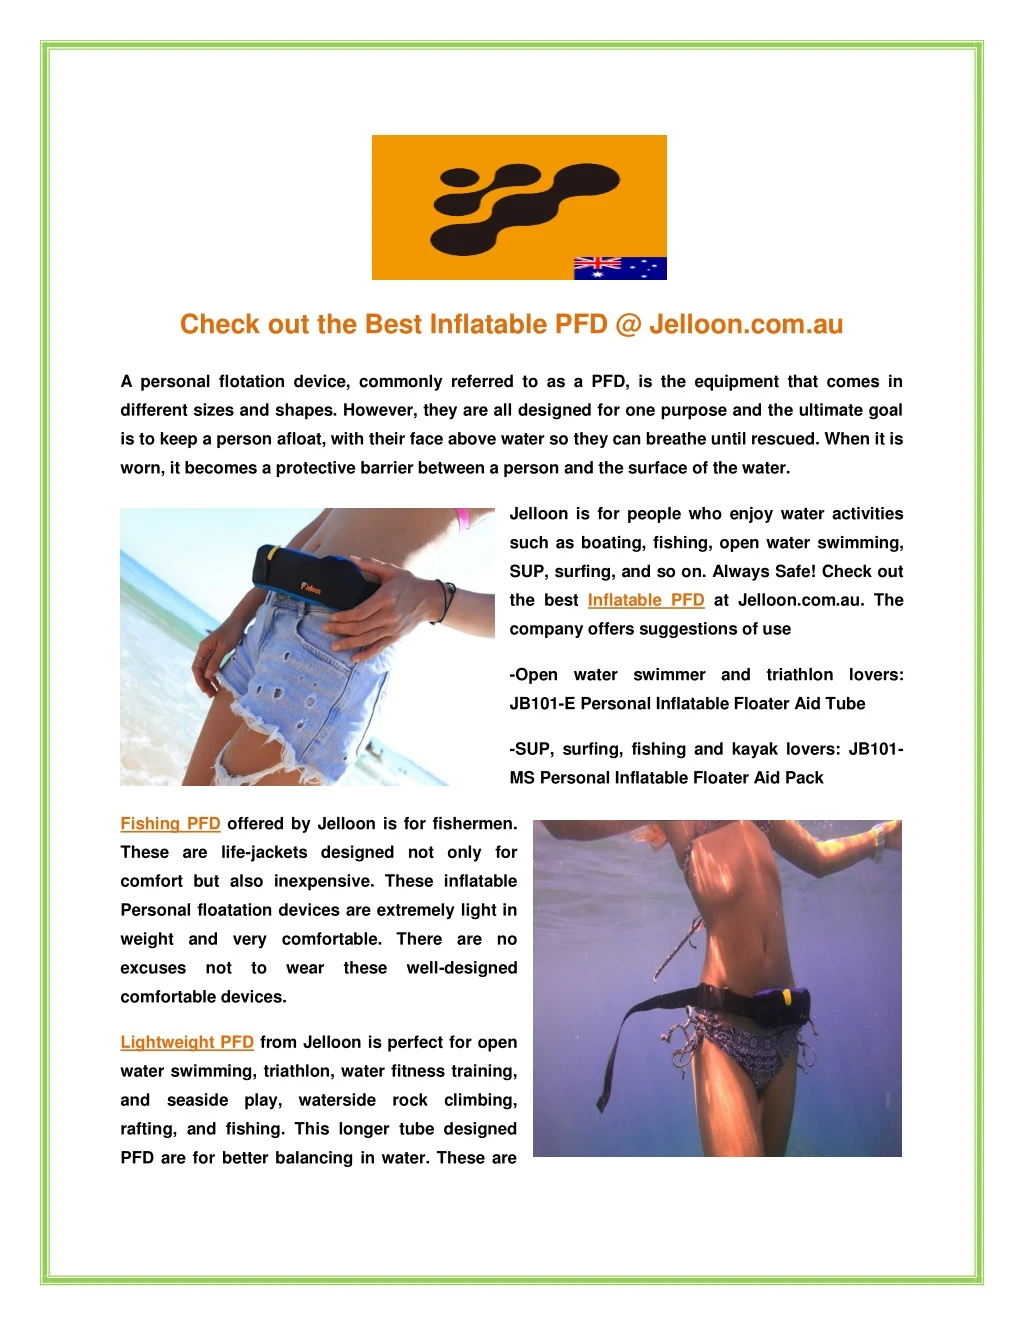 check out the best inflatable pfd @ jelloon com au